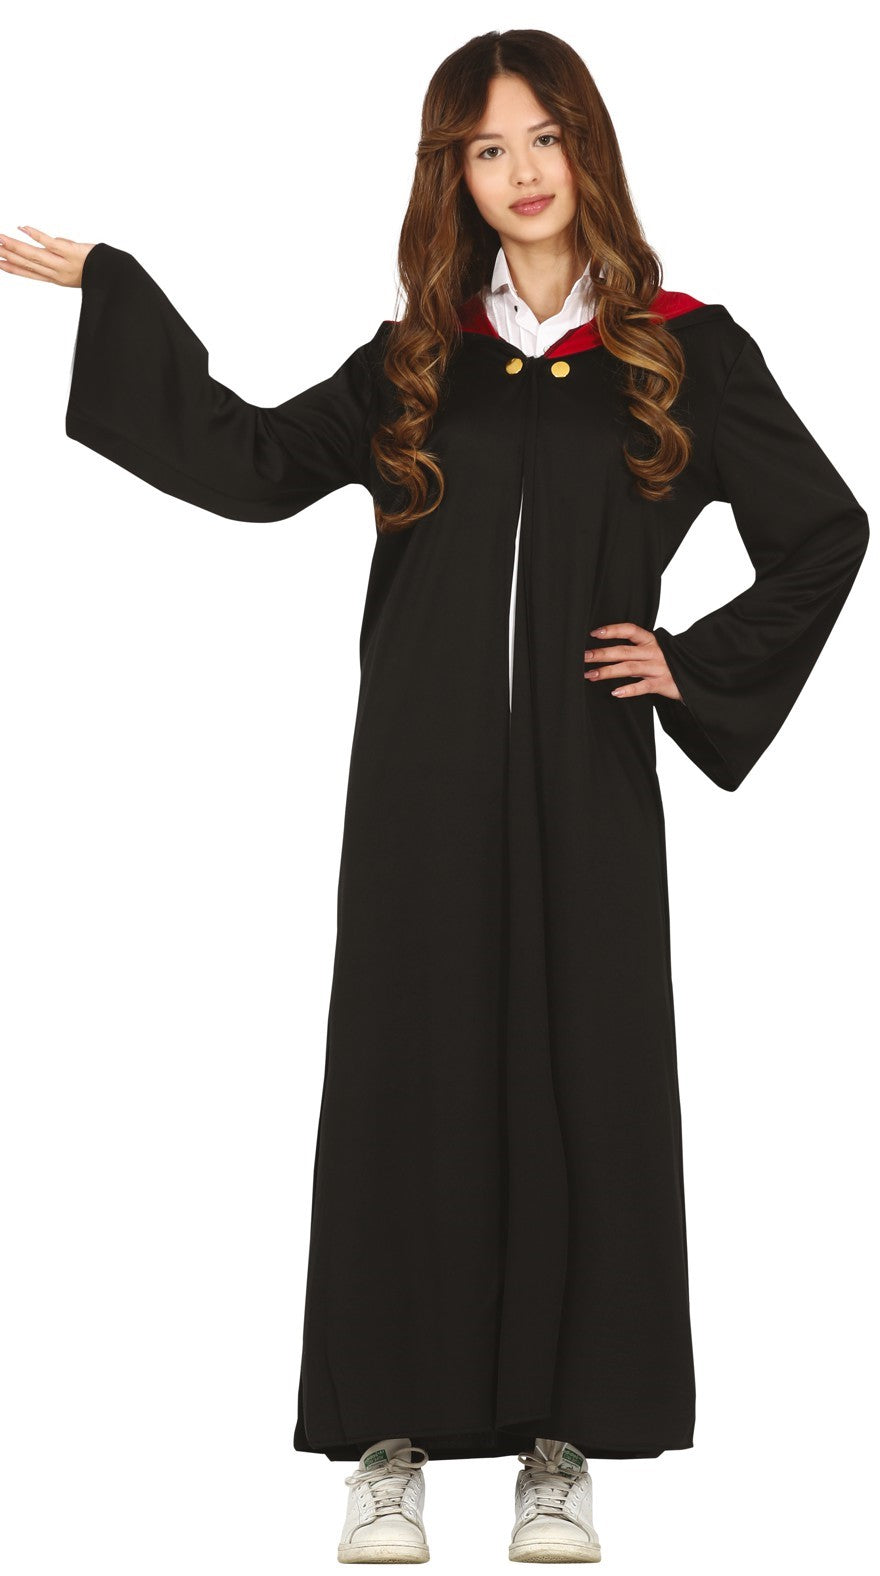 Student of Magic Teen Costume for Harry Potter or Hermione